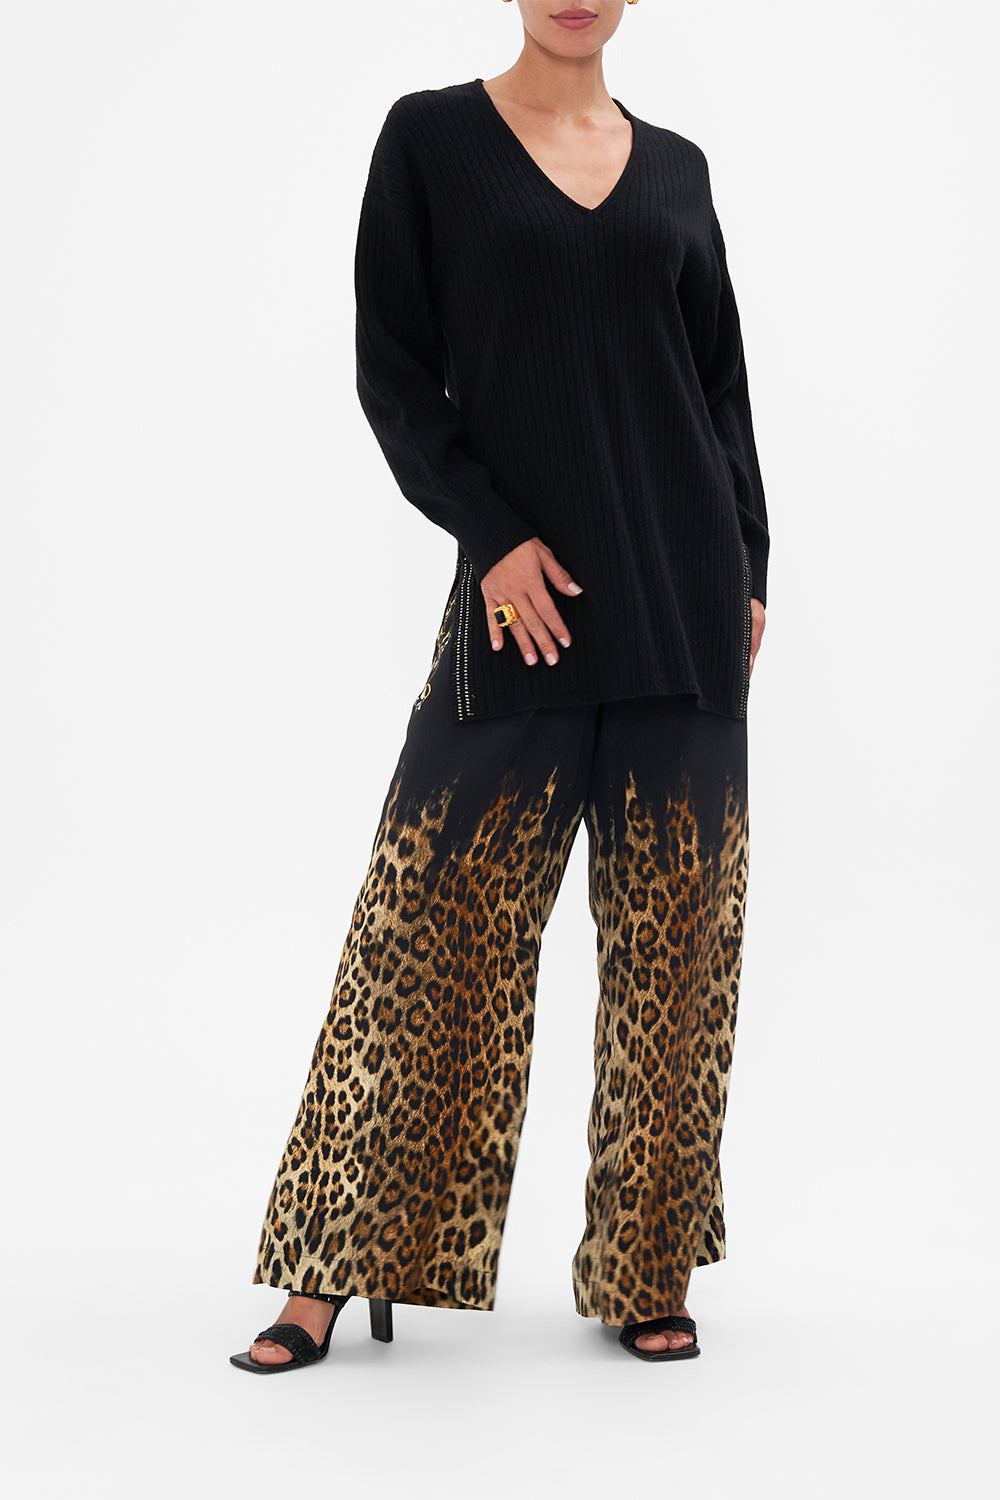 Front view of model wearing  CAMILLA black v neck wool cashmere knit jumper in Lions Mane print